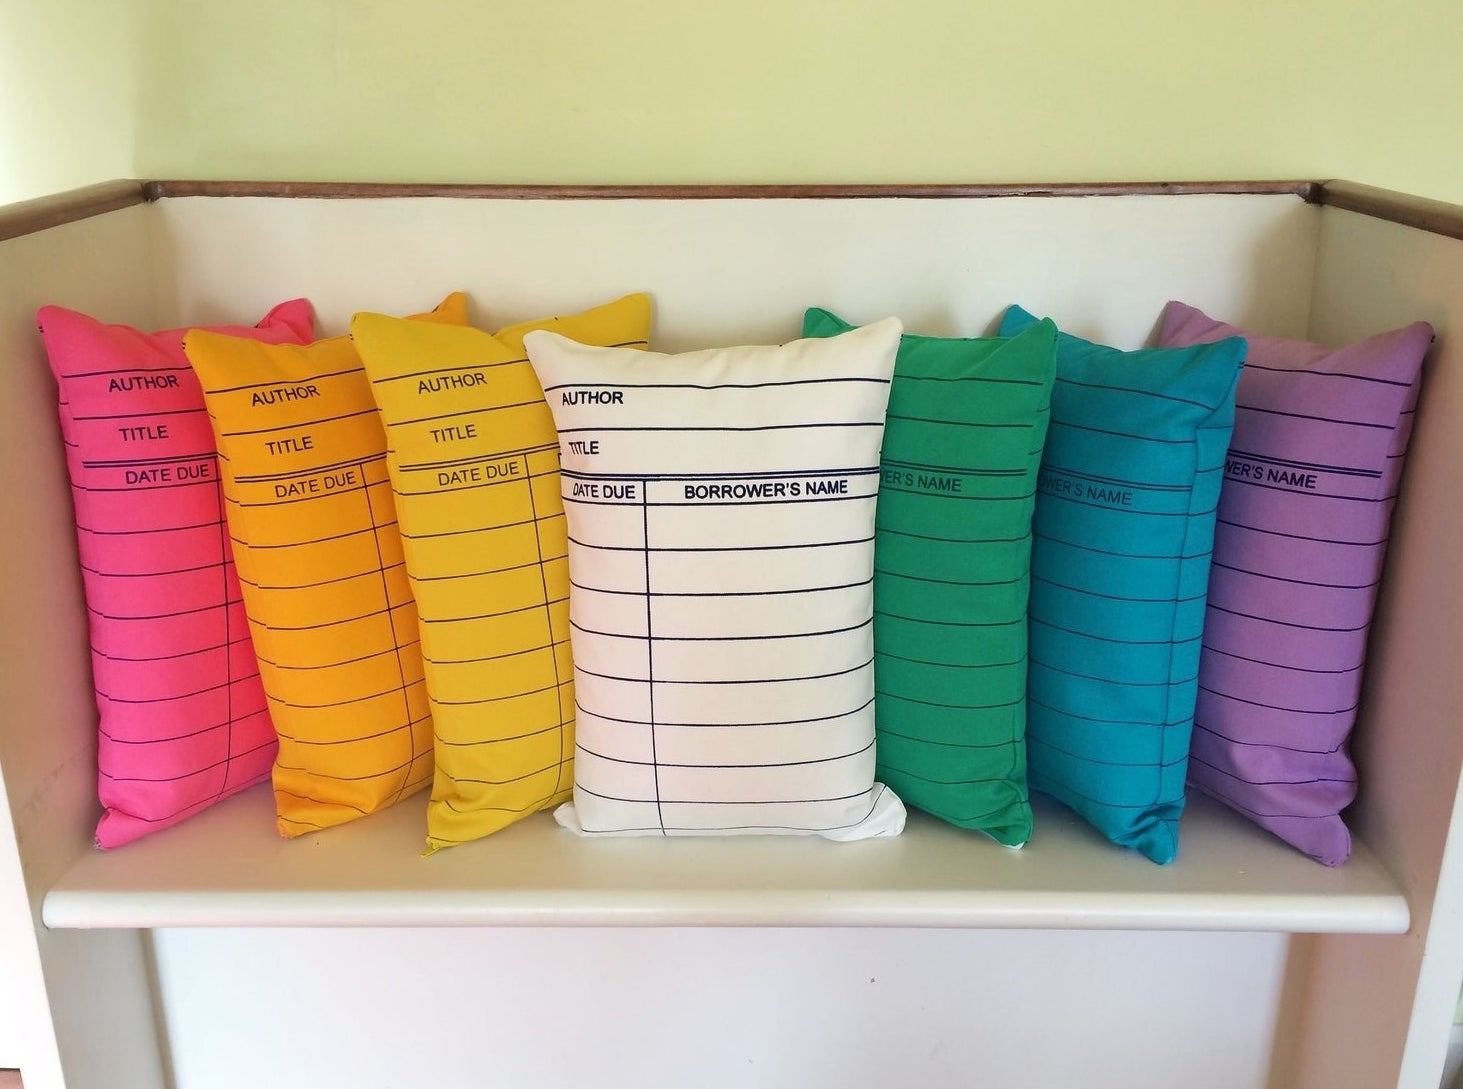 rectangular pillow printed like a library card in seven rainbow colors